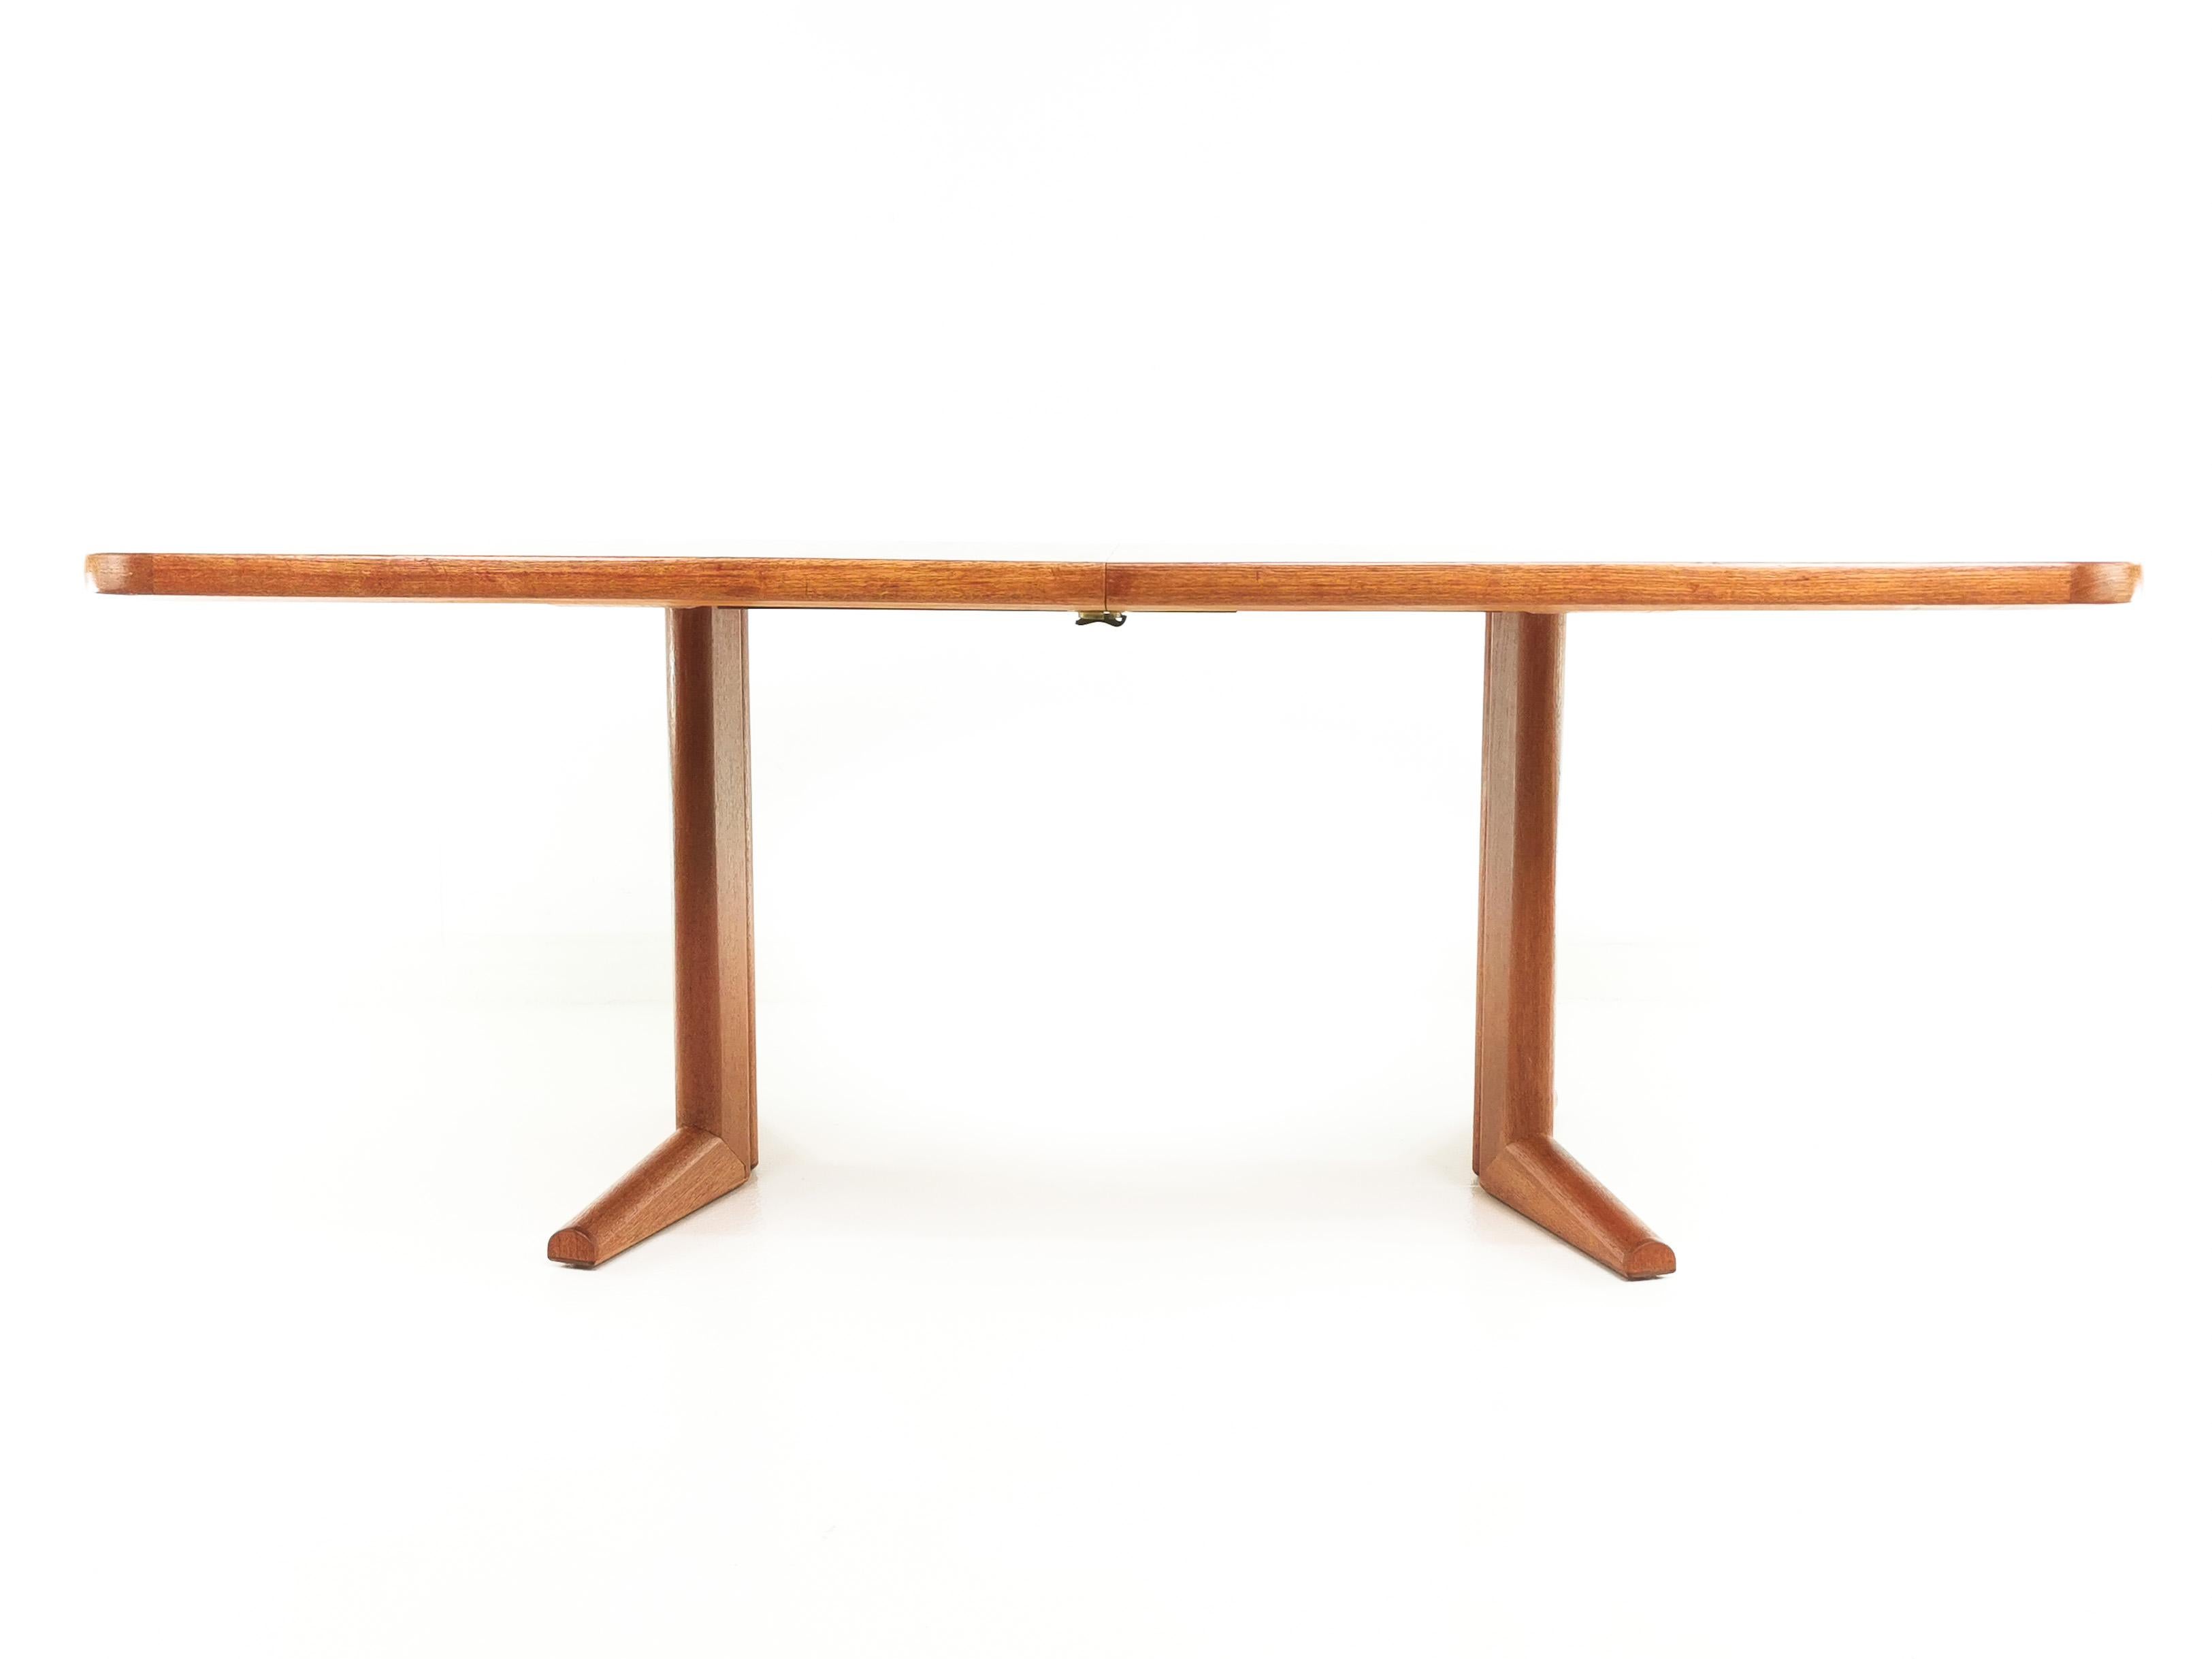 Gordon Russell teak dining table

Designed for Gordon Russell Ltd by Martin Hall, this beautiful extending dining table in teak is a superb example of British design. Created to provide dining space for up to ten diners, this table extends easily